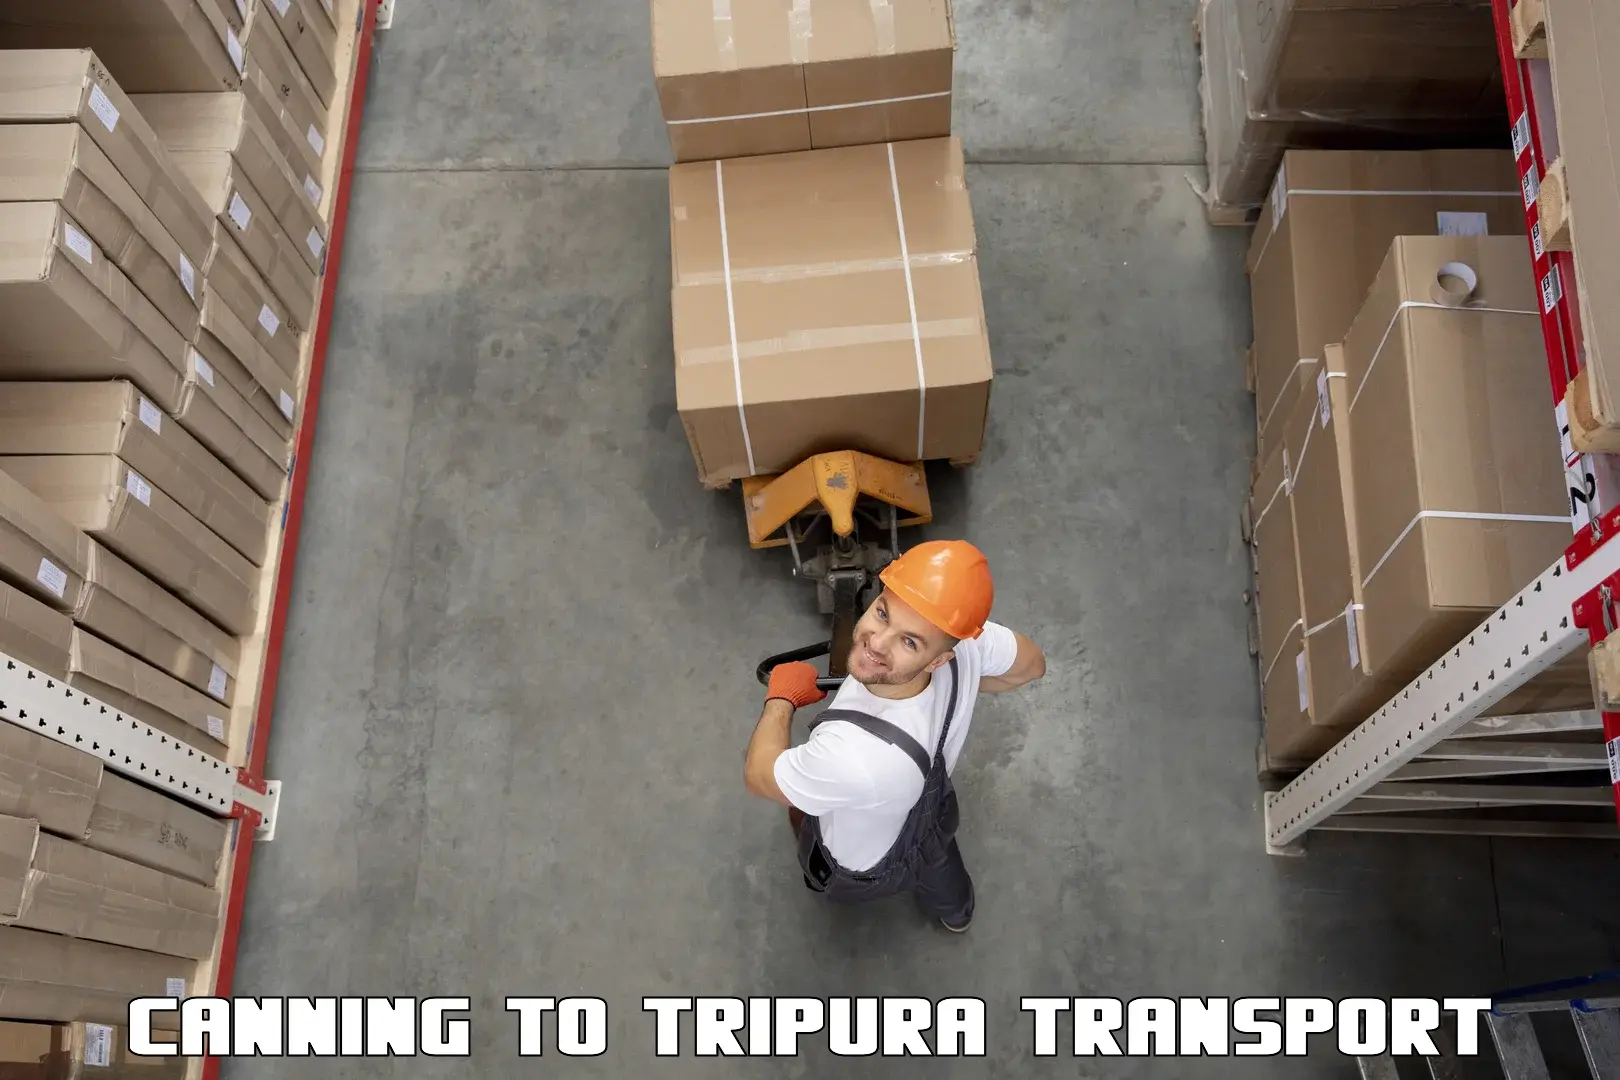 Luggage transport services in Canning to North Tripura